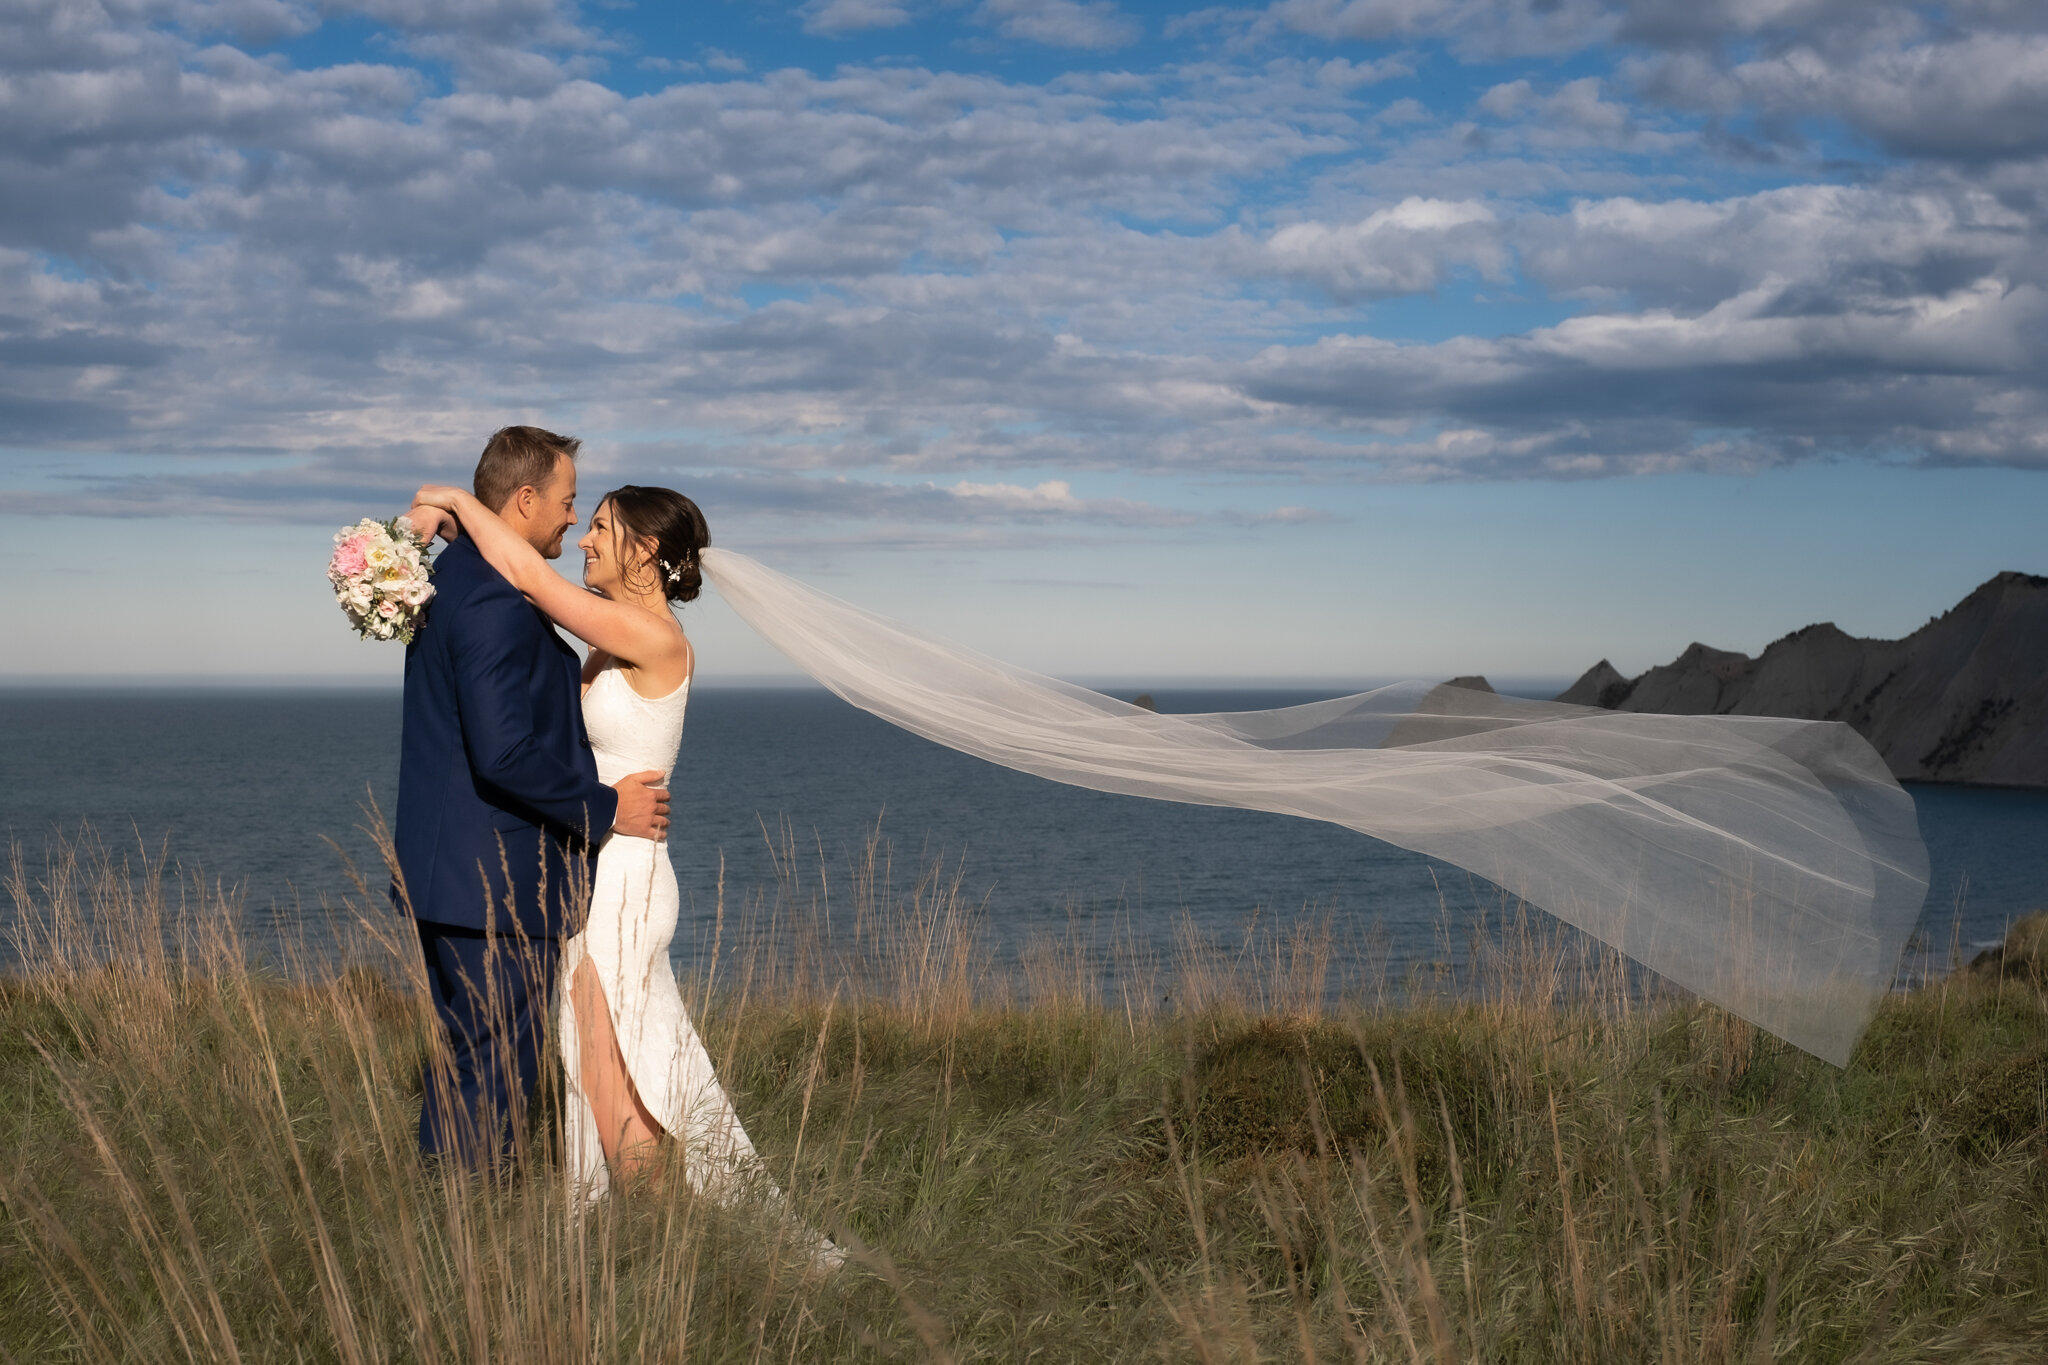 weddings at the farm cape kidnappers